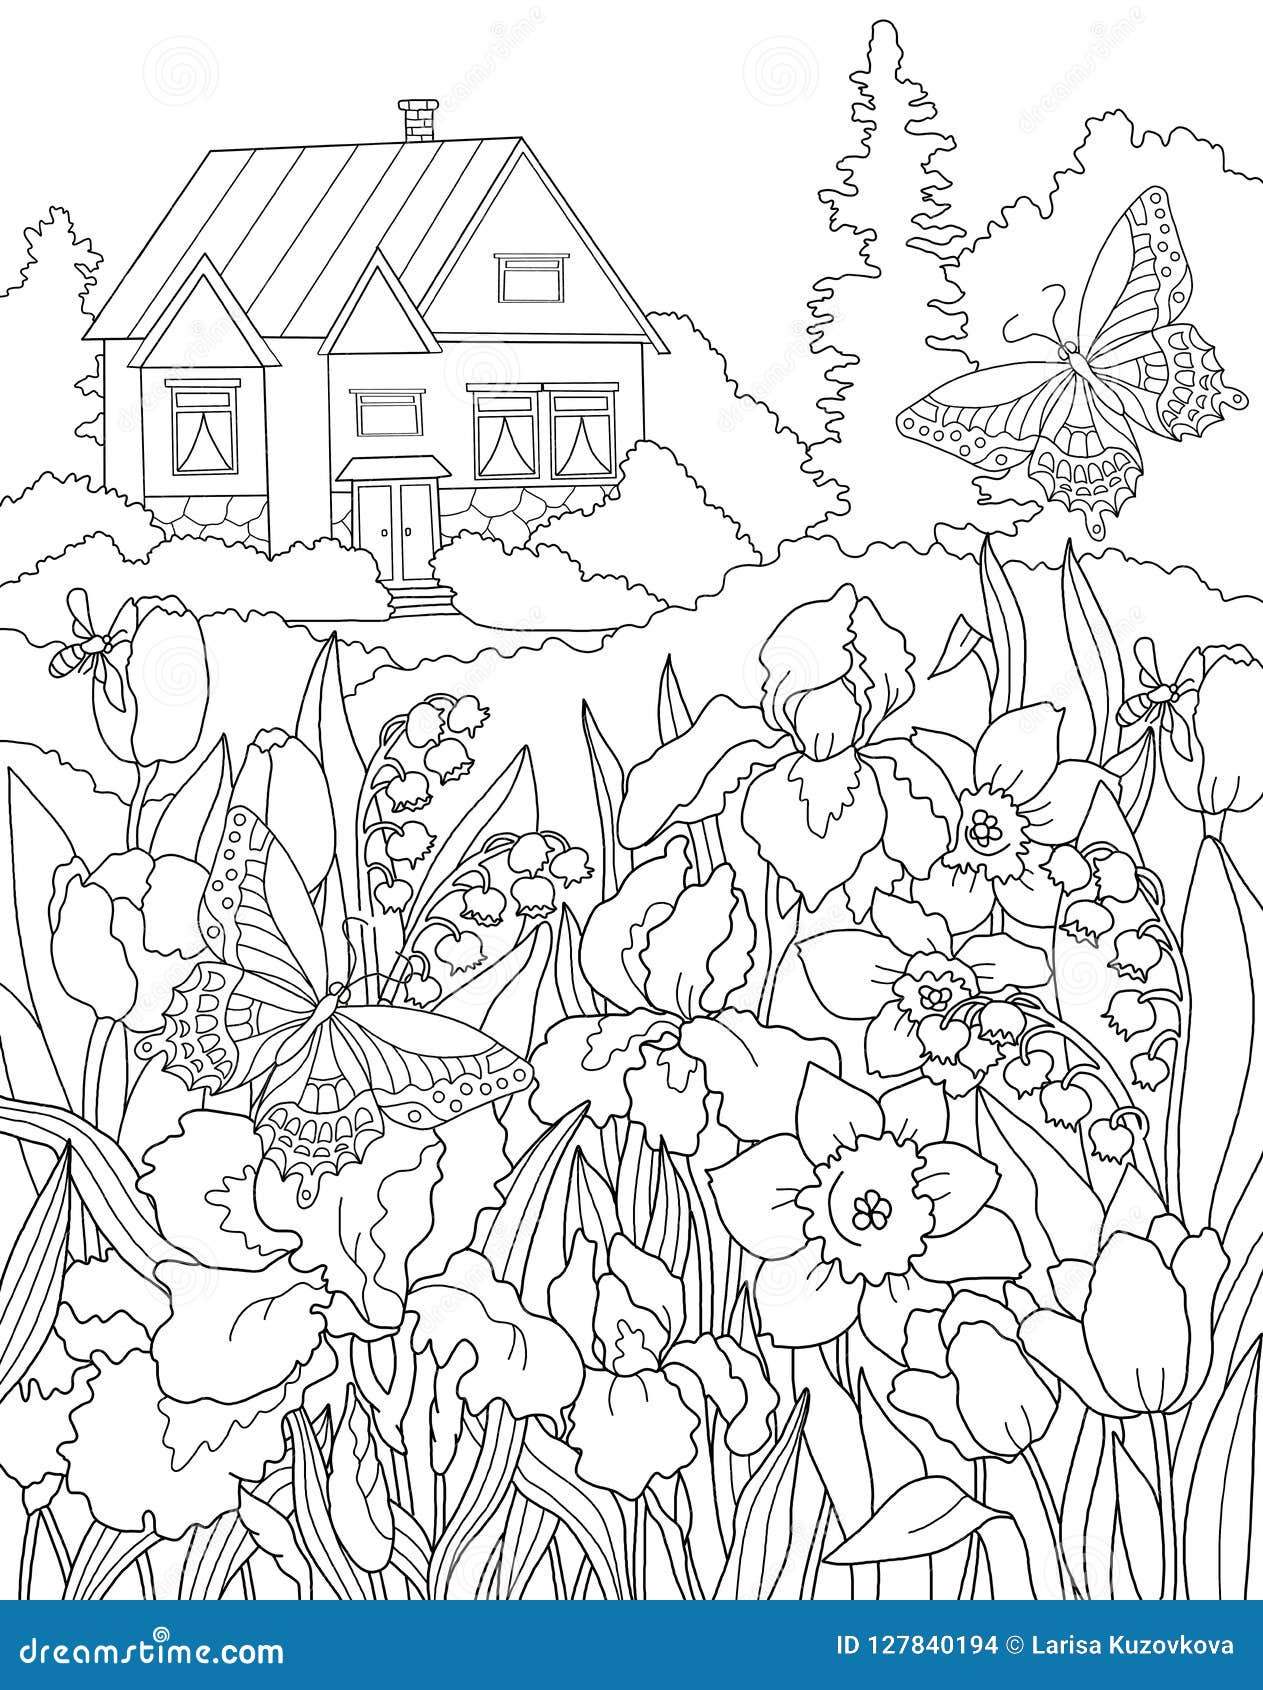 Coloring Garden Stock Illustrations 21 542 Coloring Garden Stock Illustrations Vectors Clipart Dreamstime